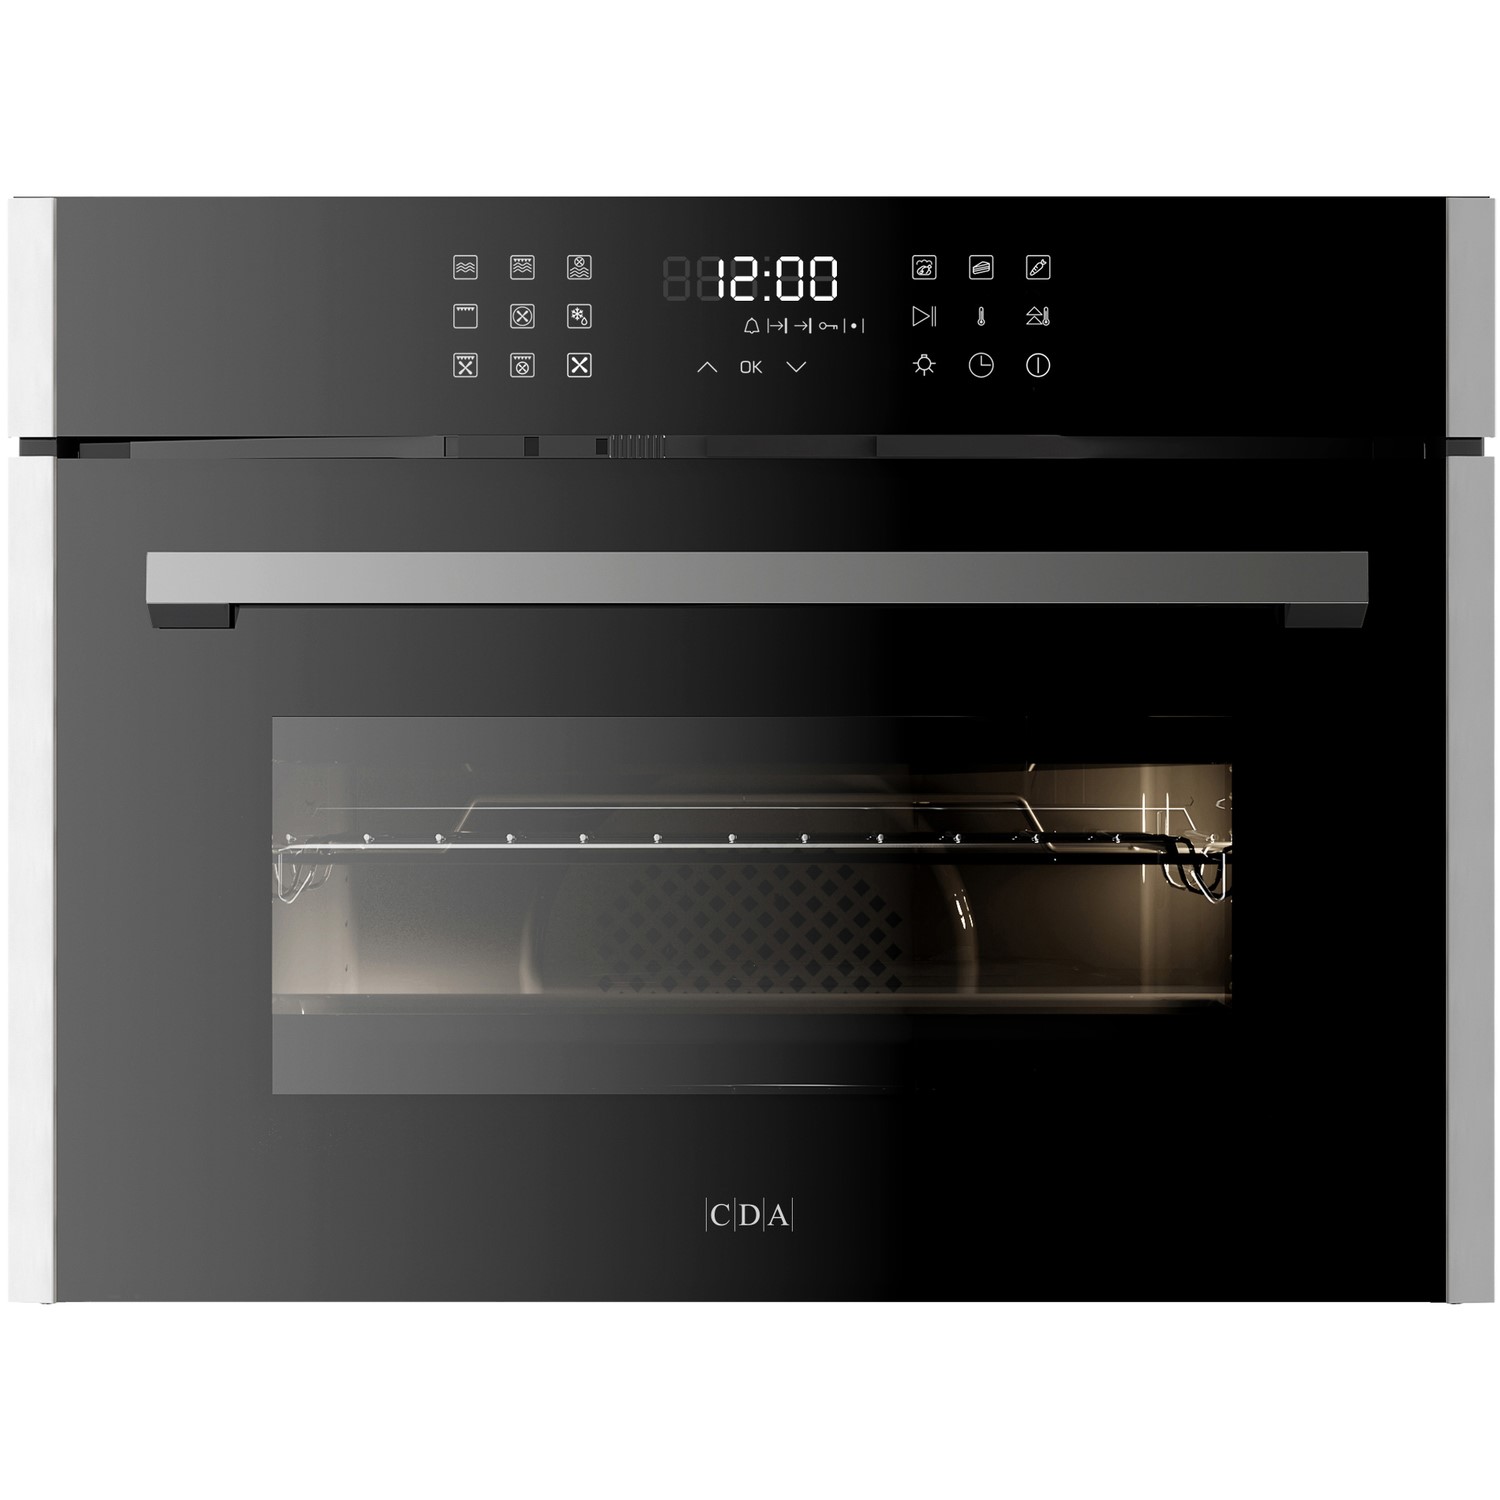 Photos - Other for Computer CDA Built-In Combination Microwave Oven - Stainless Steel VK903SS 